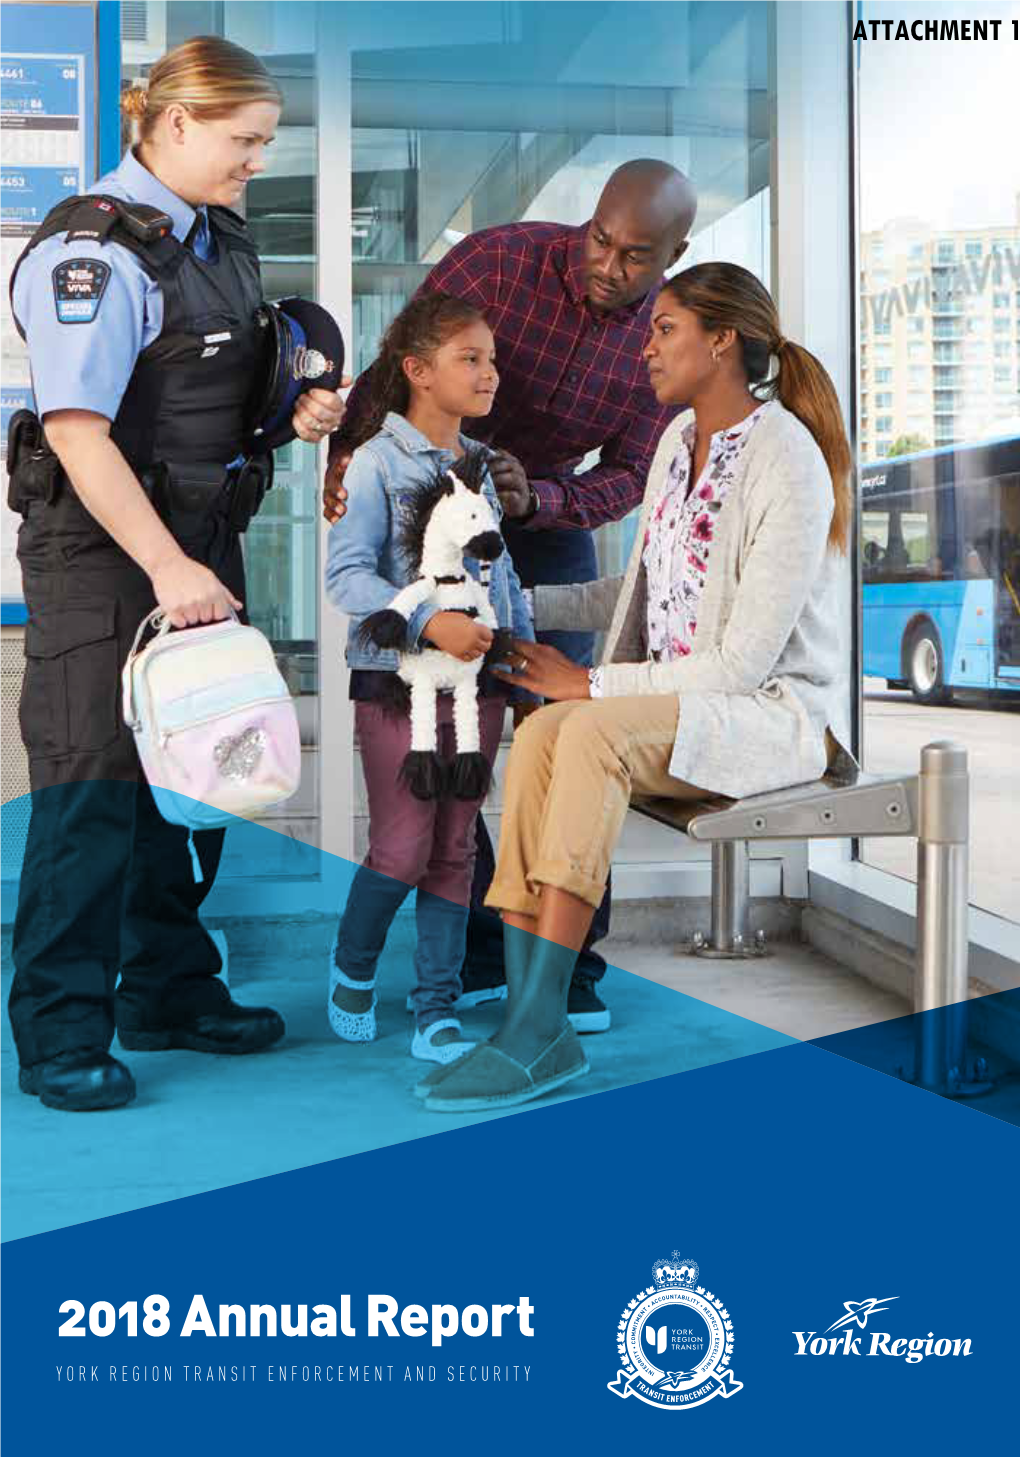 2018 Annual Report YORK REGION TRANSIT ENFORCEMENT and SECURITY